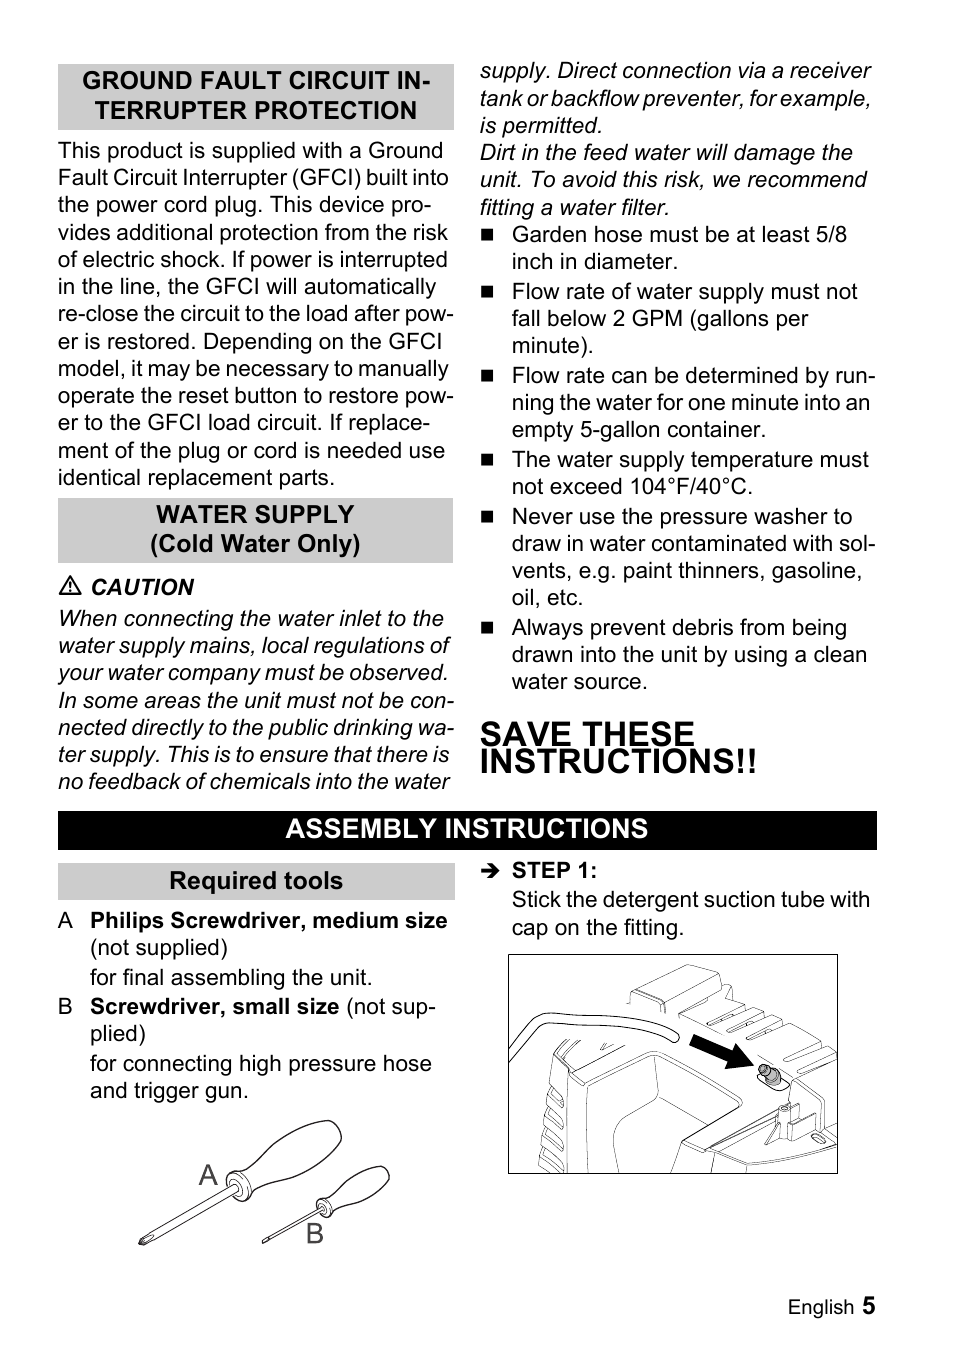 Save these instructions, Assembly instructions | Karcher K 3.91 M User  Manual | Page 5 / 52 | Original mode